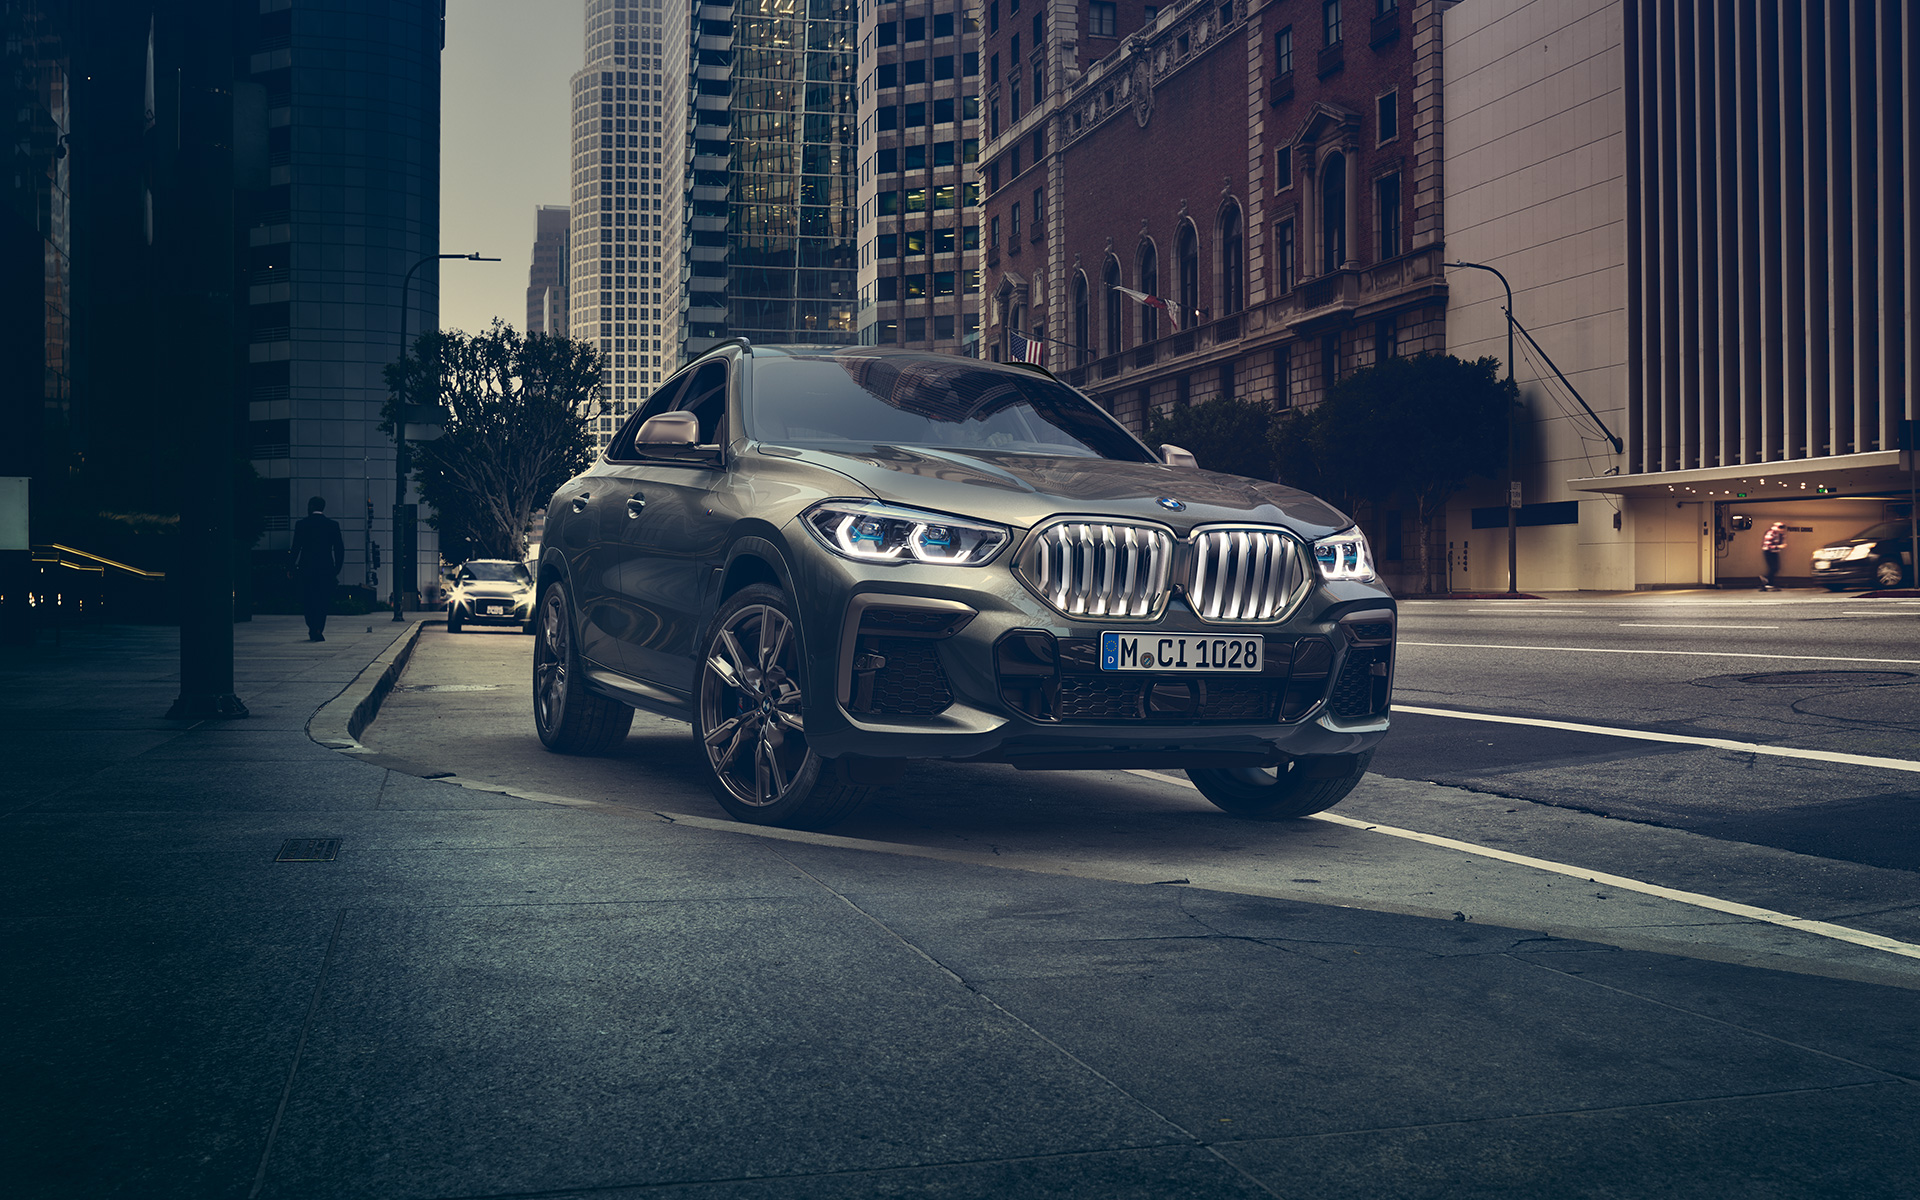 BMW X6 M50i in three-quarter front perspective standing in front of an urban setting G06 2018 SUV